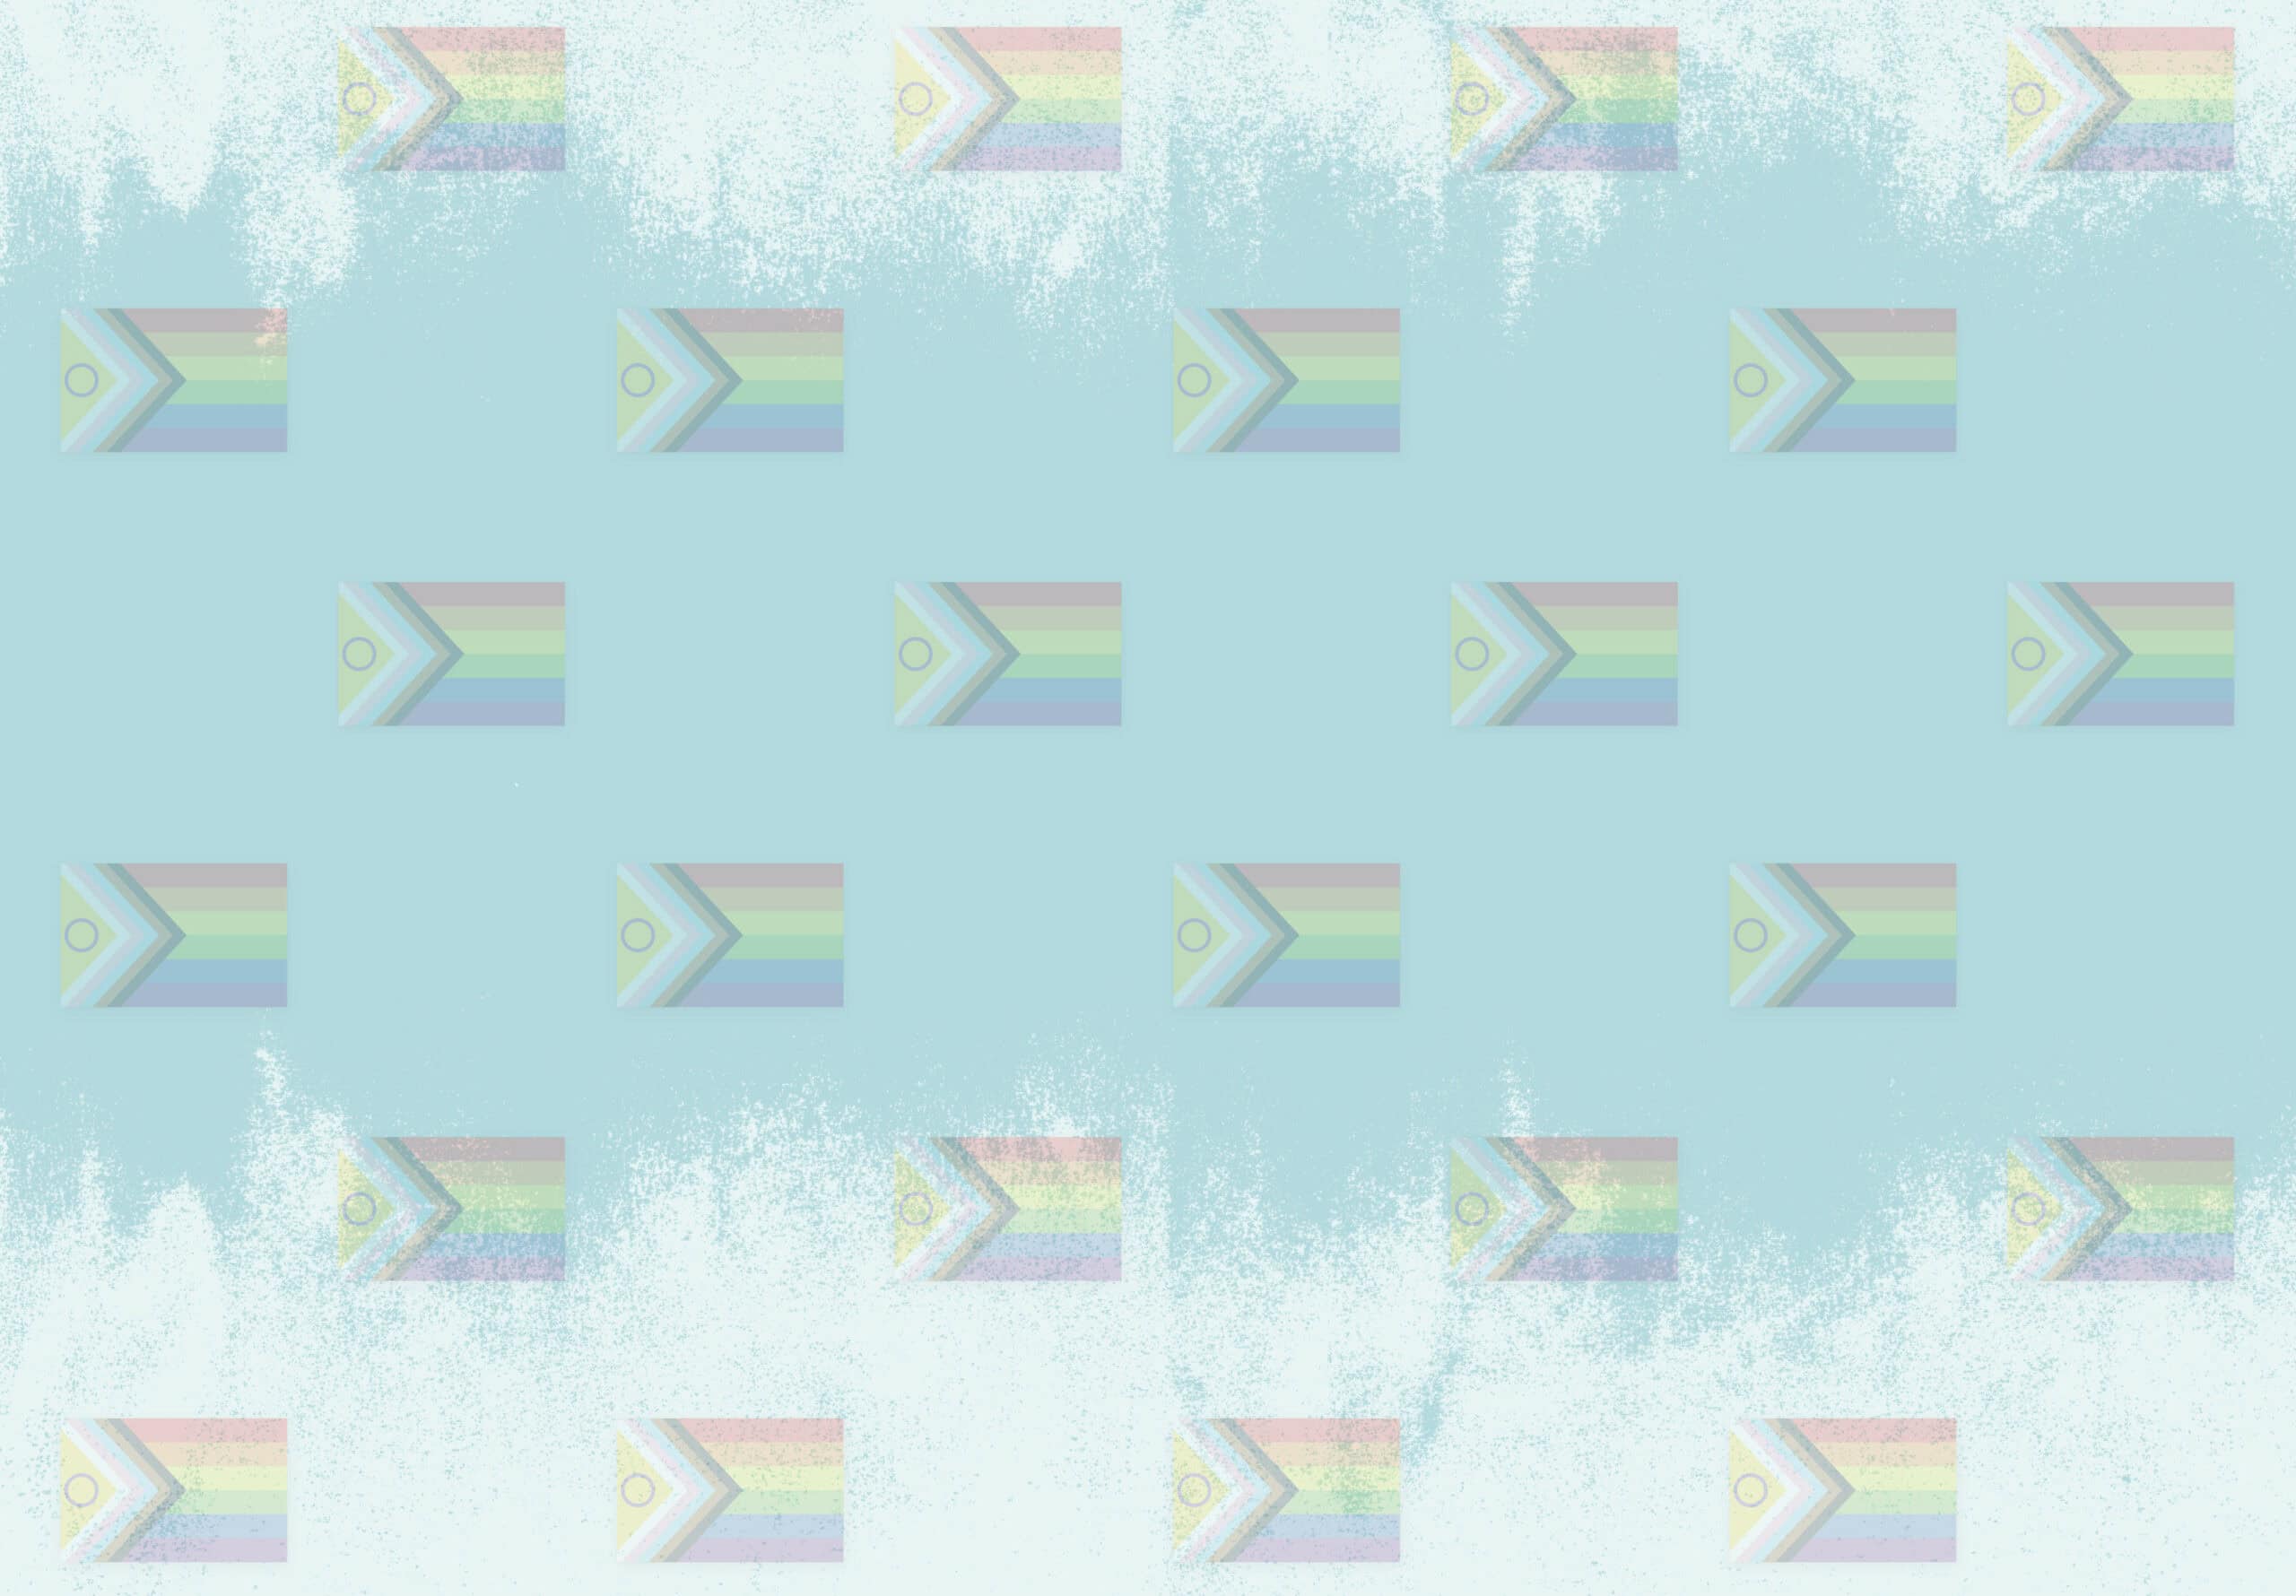 Image: Textured blue background with a collage of progress flags.